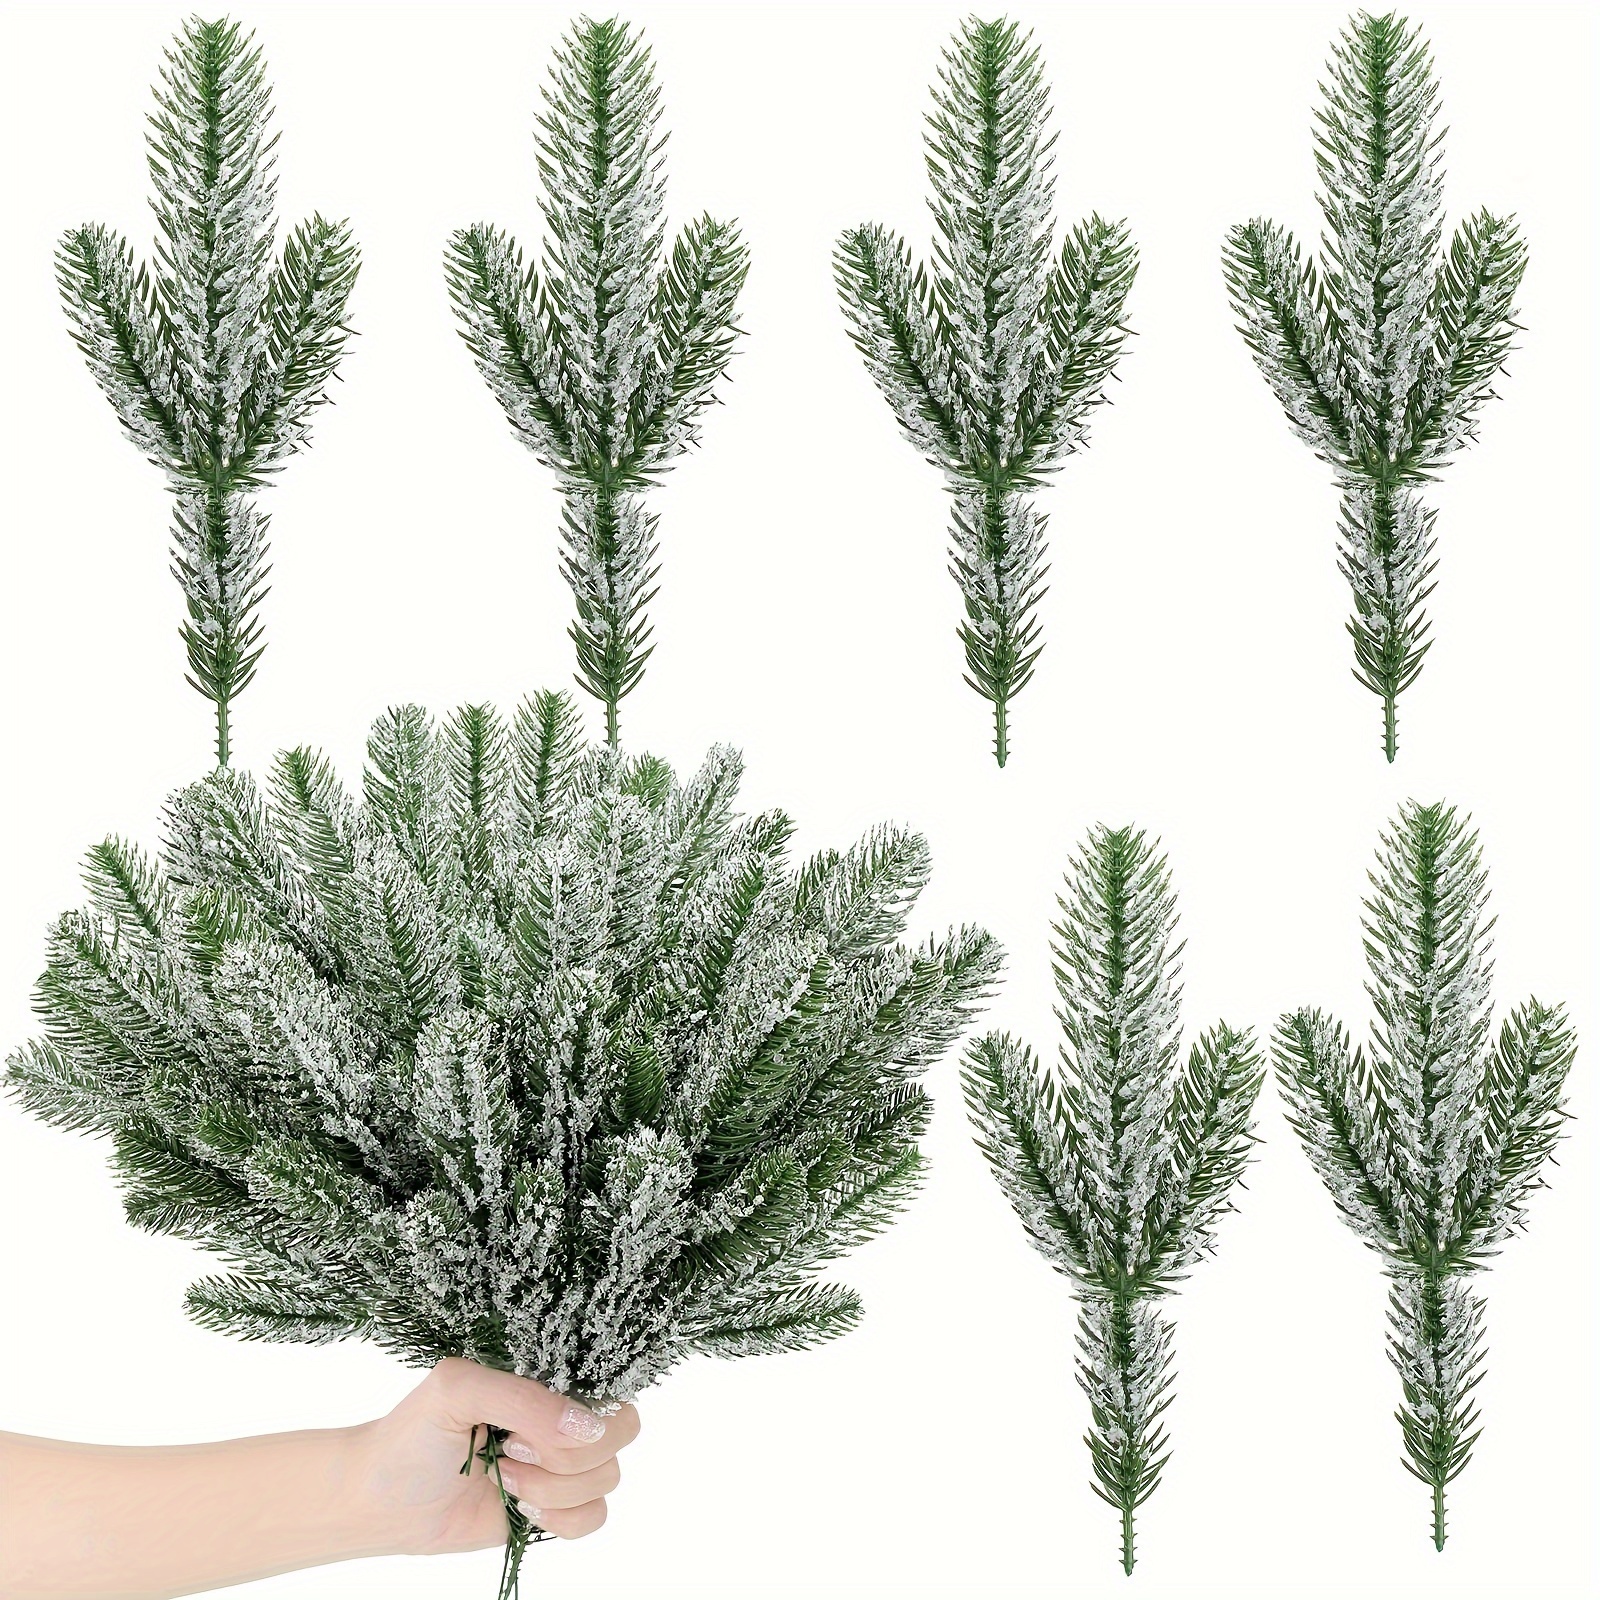 Christmas Picks Floral Picks Christmas Greenery Artificial Pine Branches  for Garland Crafts Home Decoration 13.7 50Pcs